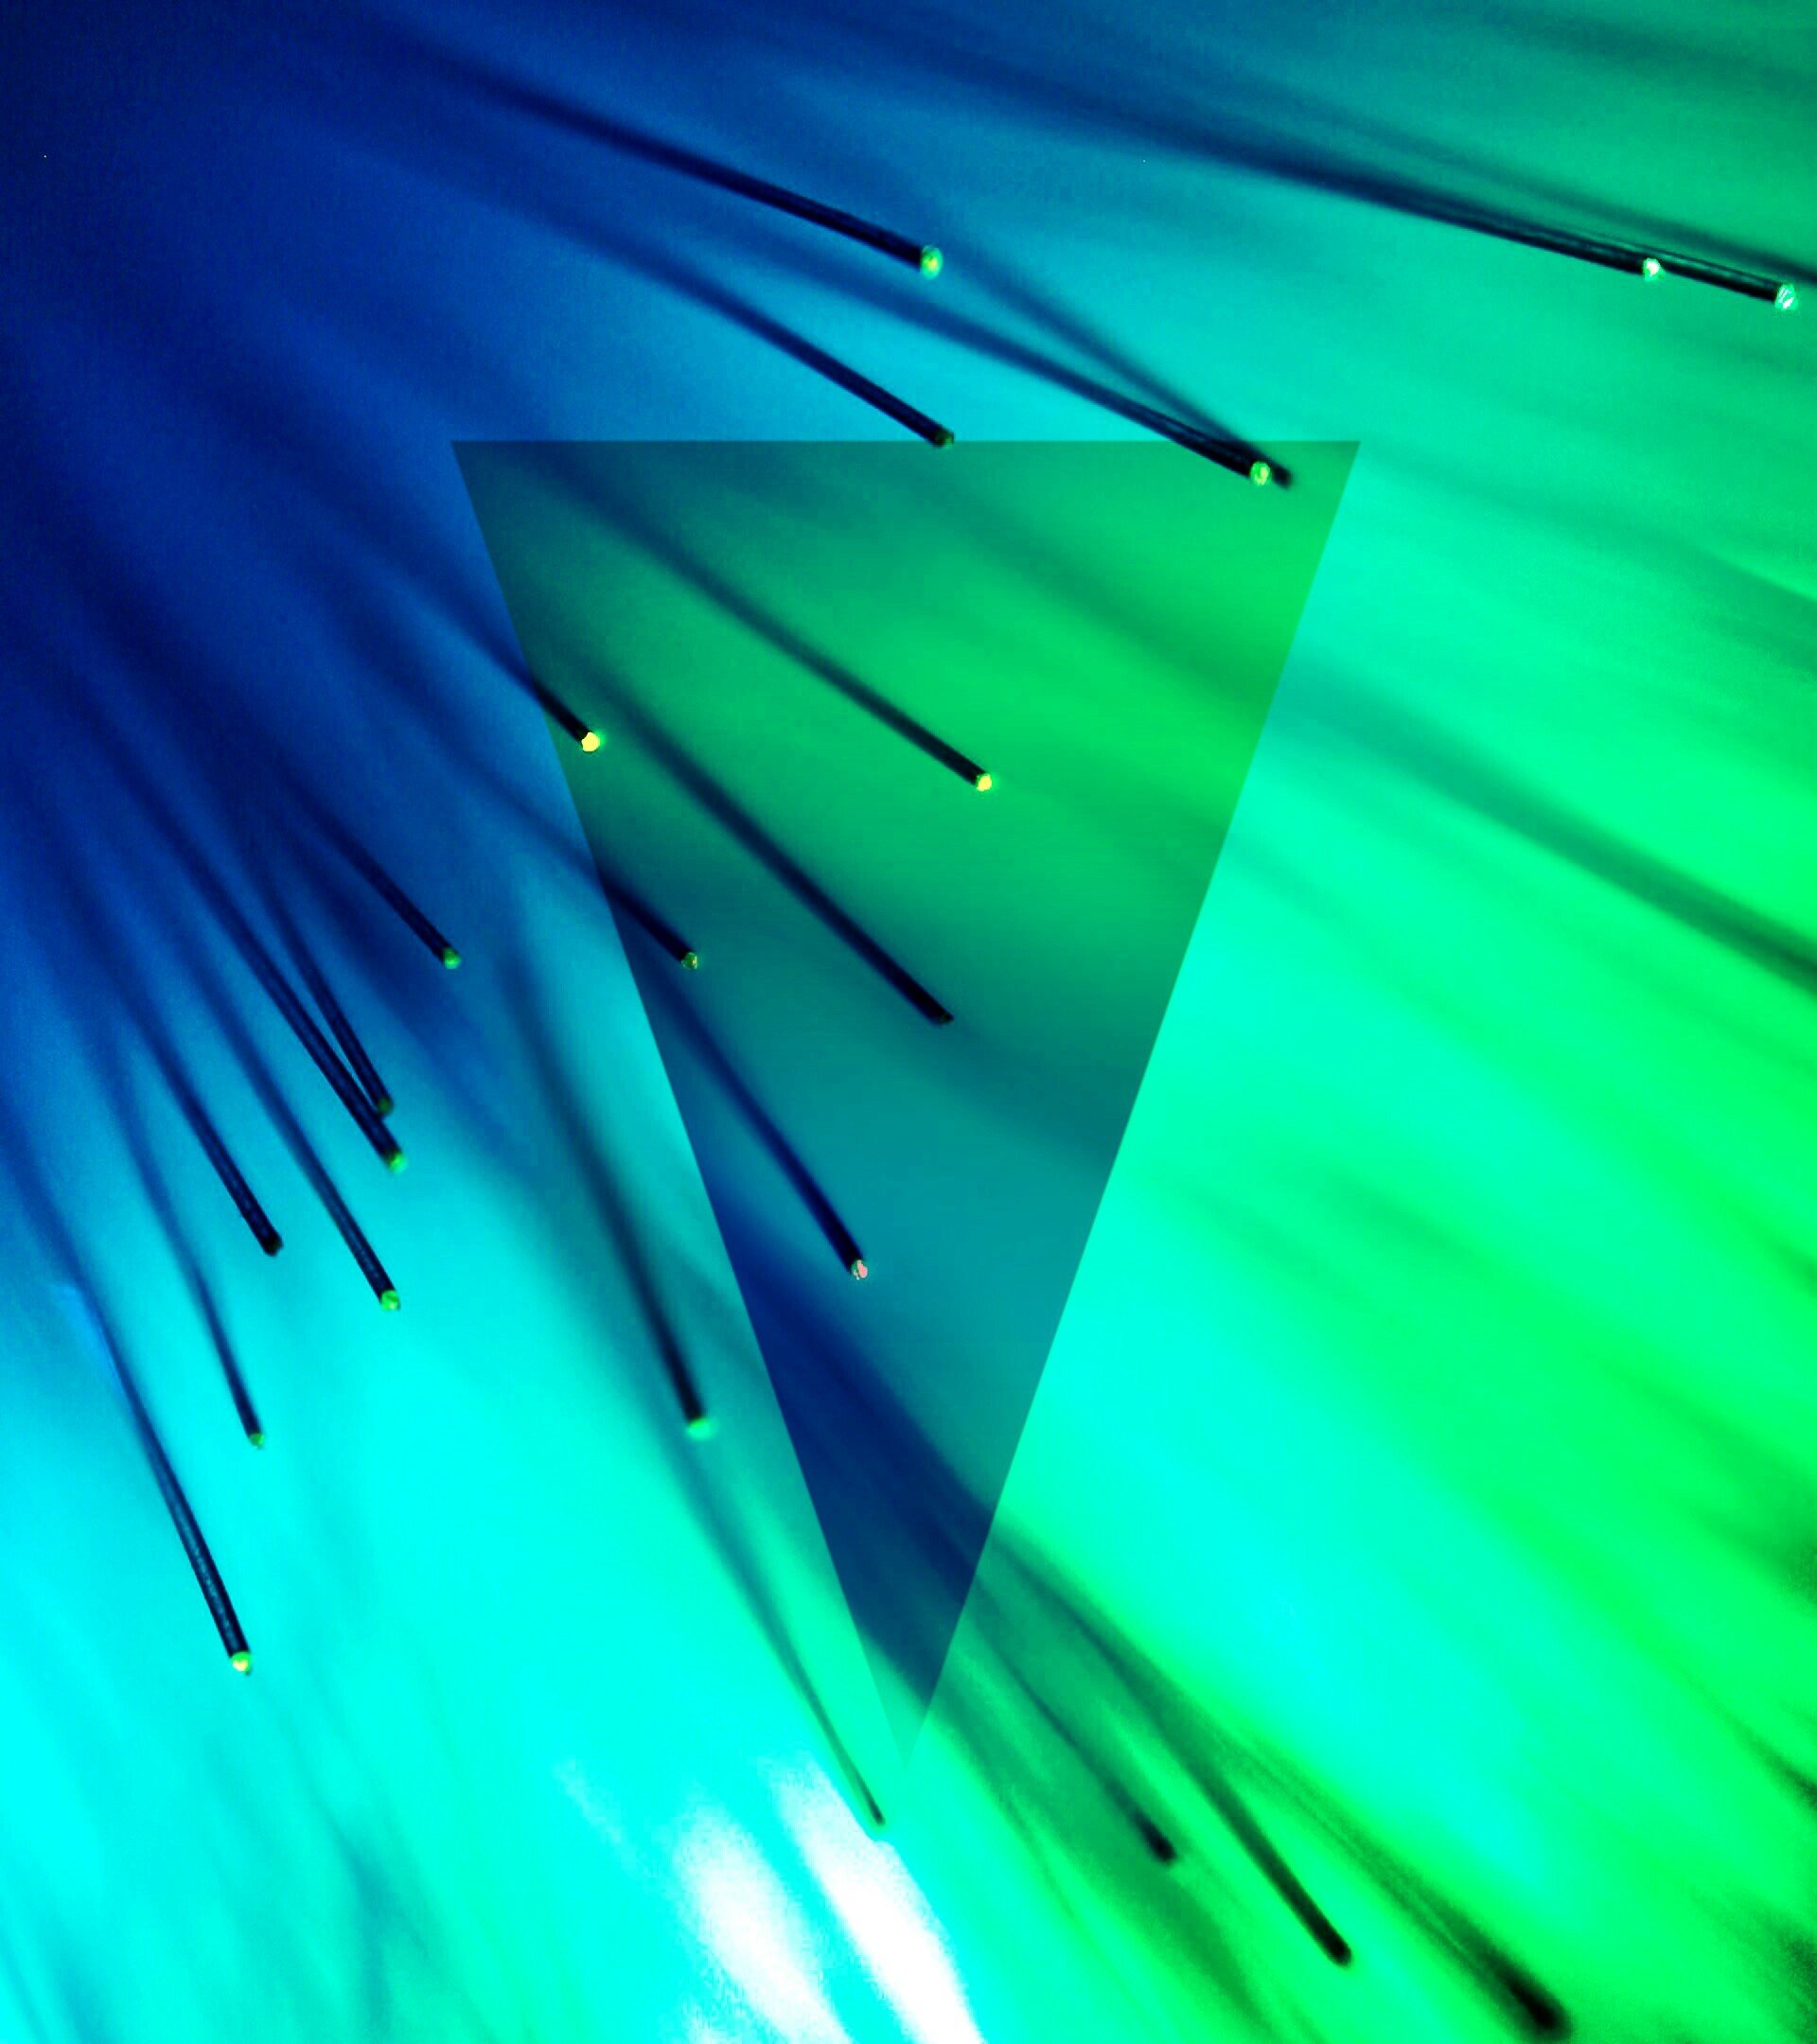 Android (operating system), Pattern, Optic fiber Wallpaper